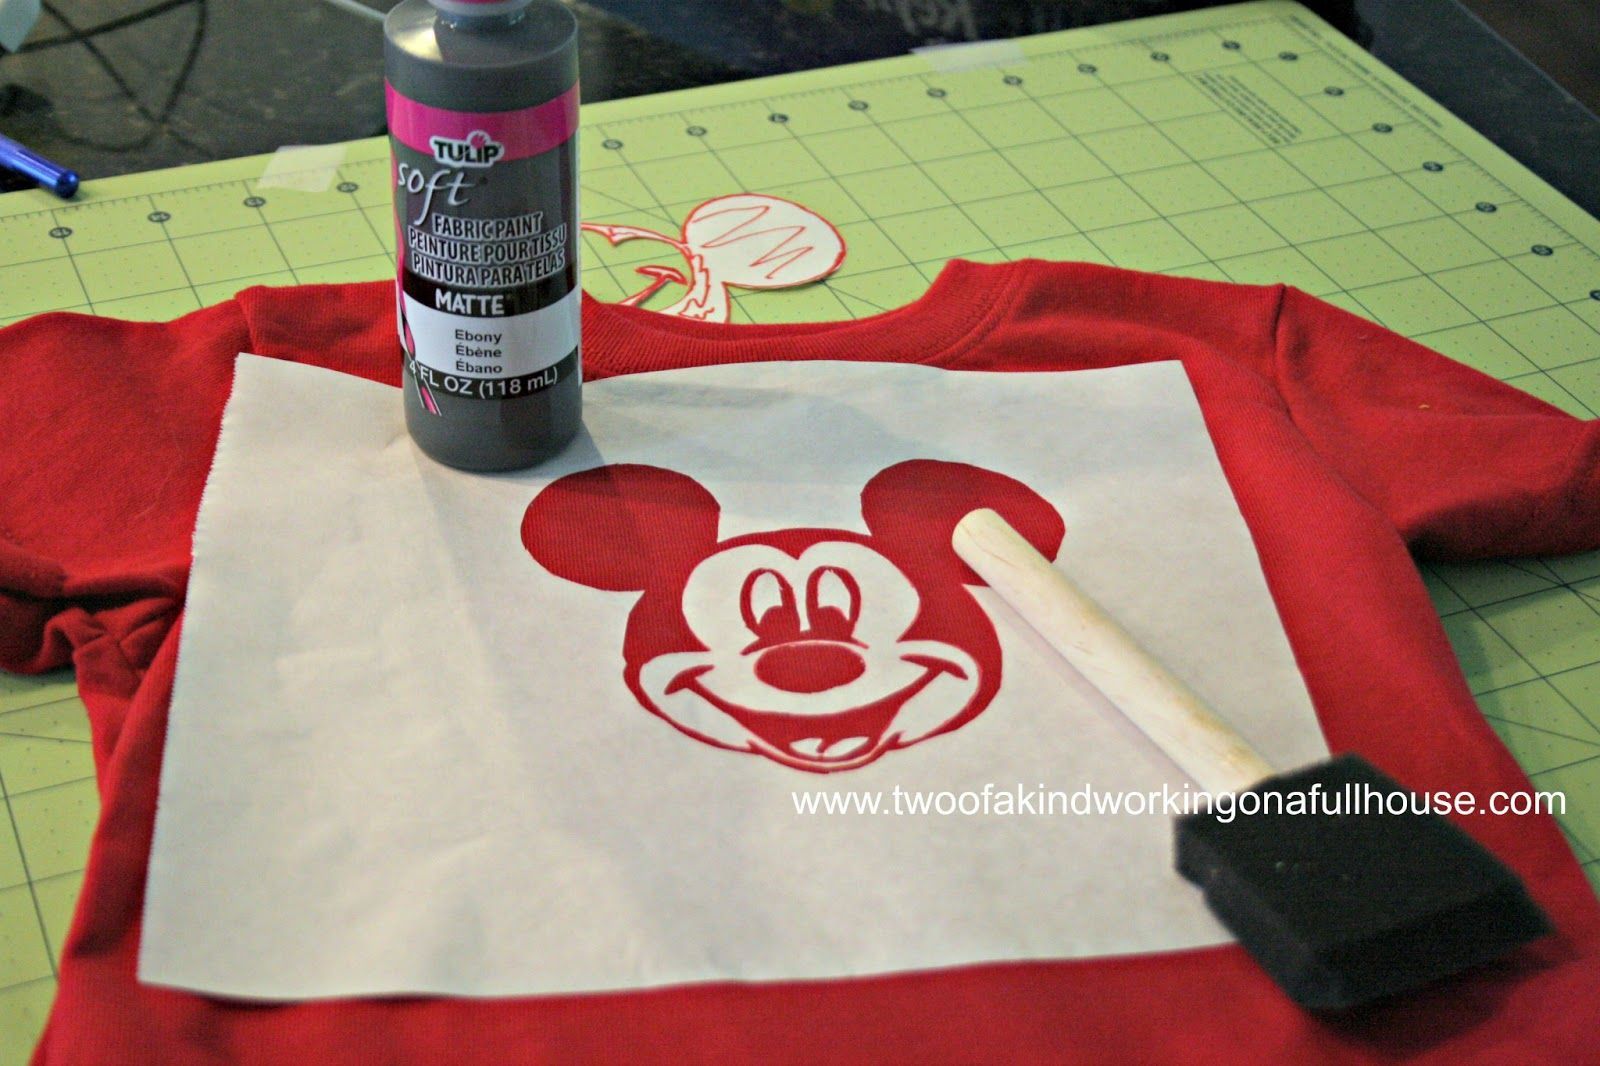 Create Disney Shirts | Make Your Own Mickey / Minnie Mouse Shirt For Disney World – No Sewing …